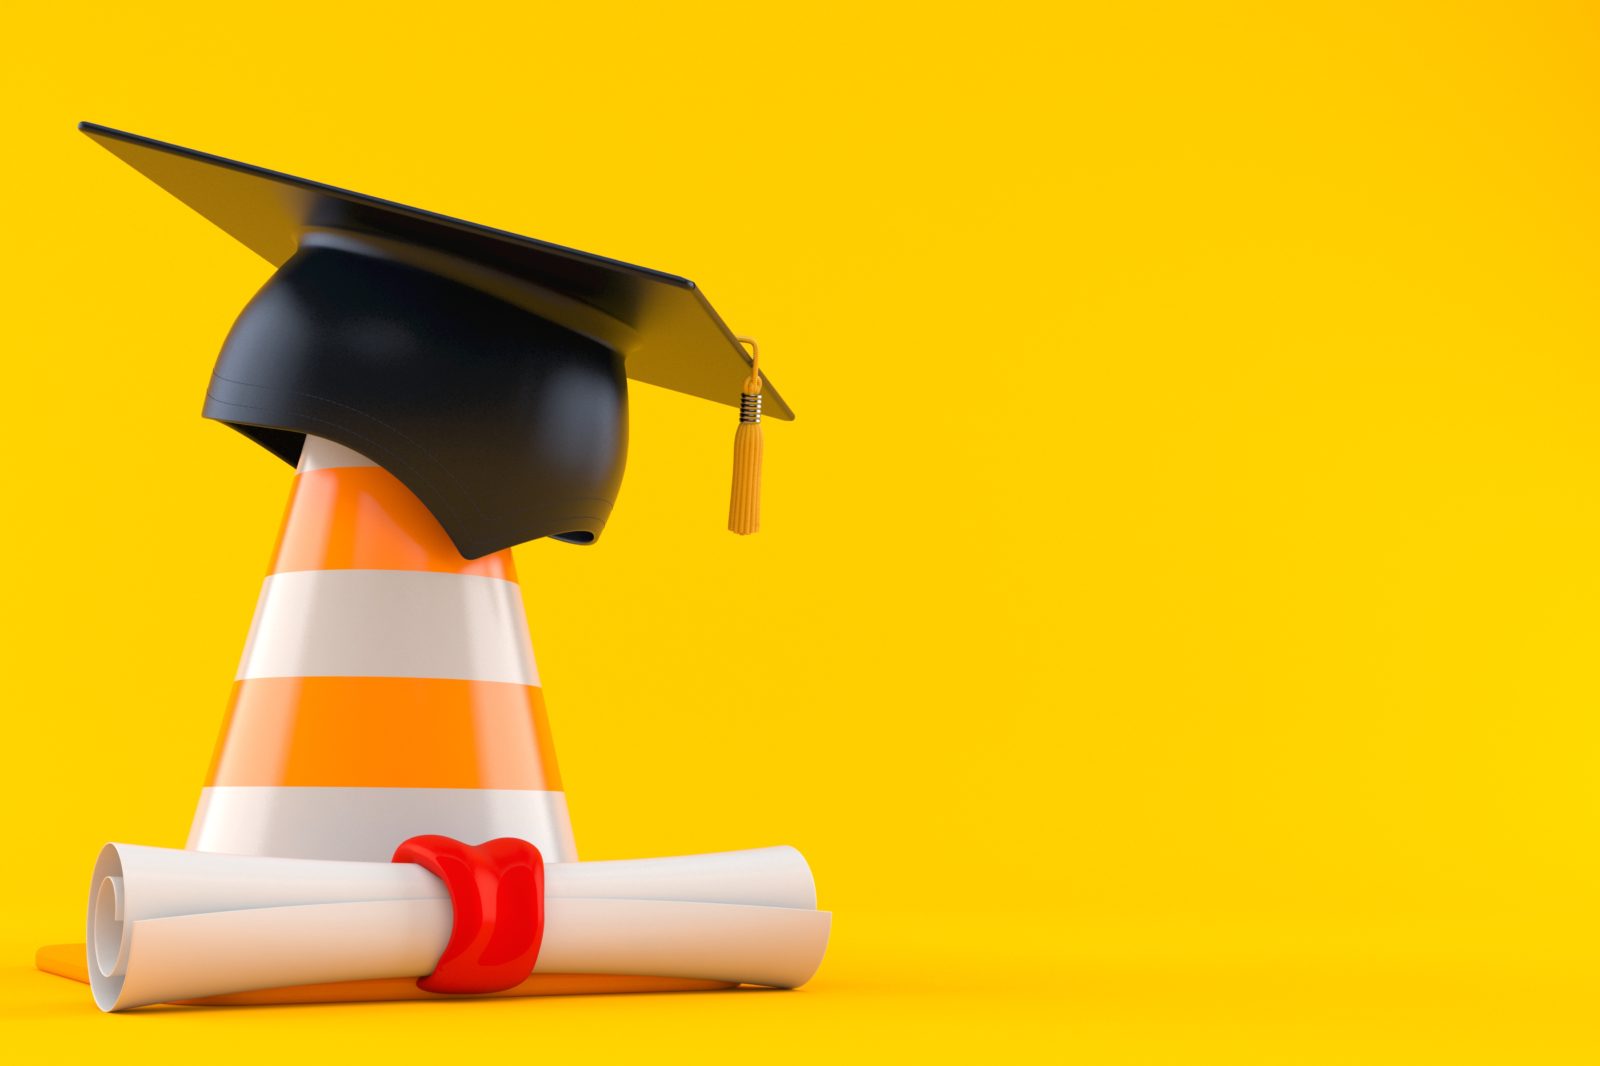 Mortarboard with traffic cone